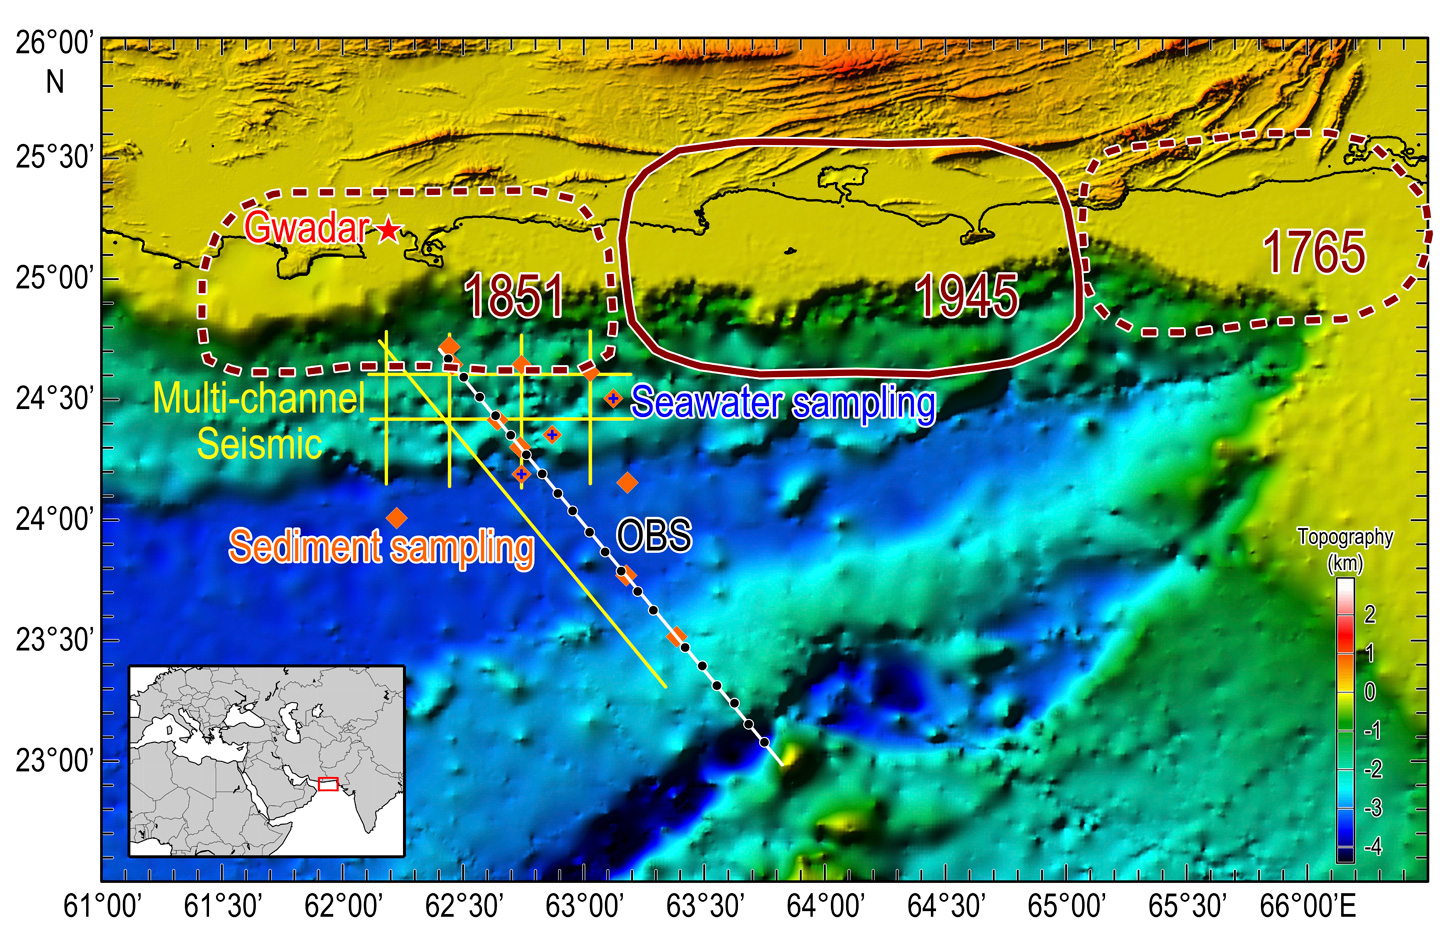 Scientists took sediment samples (orange dots) and deployed OBSs every 11 km (black dots on white line) in the Makran trench